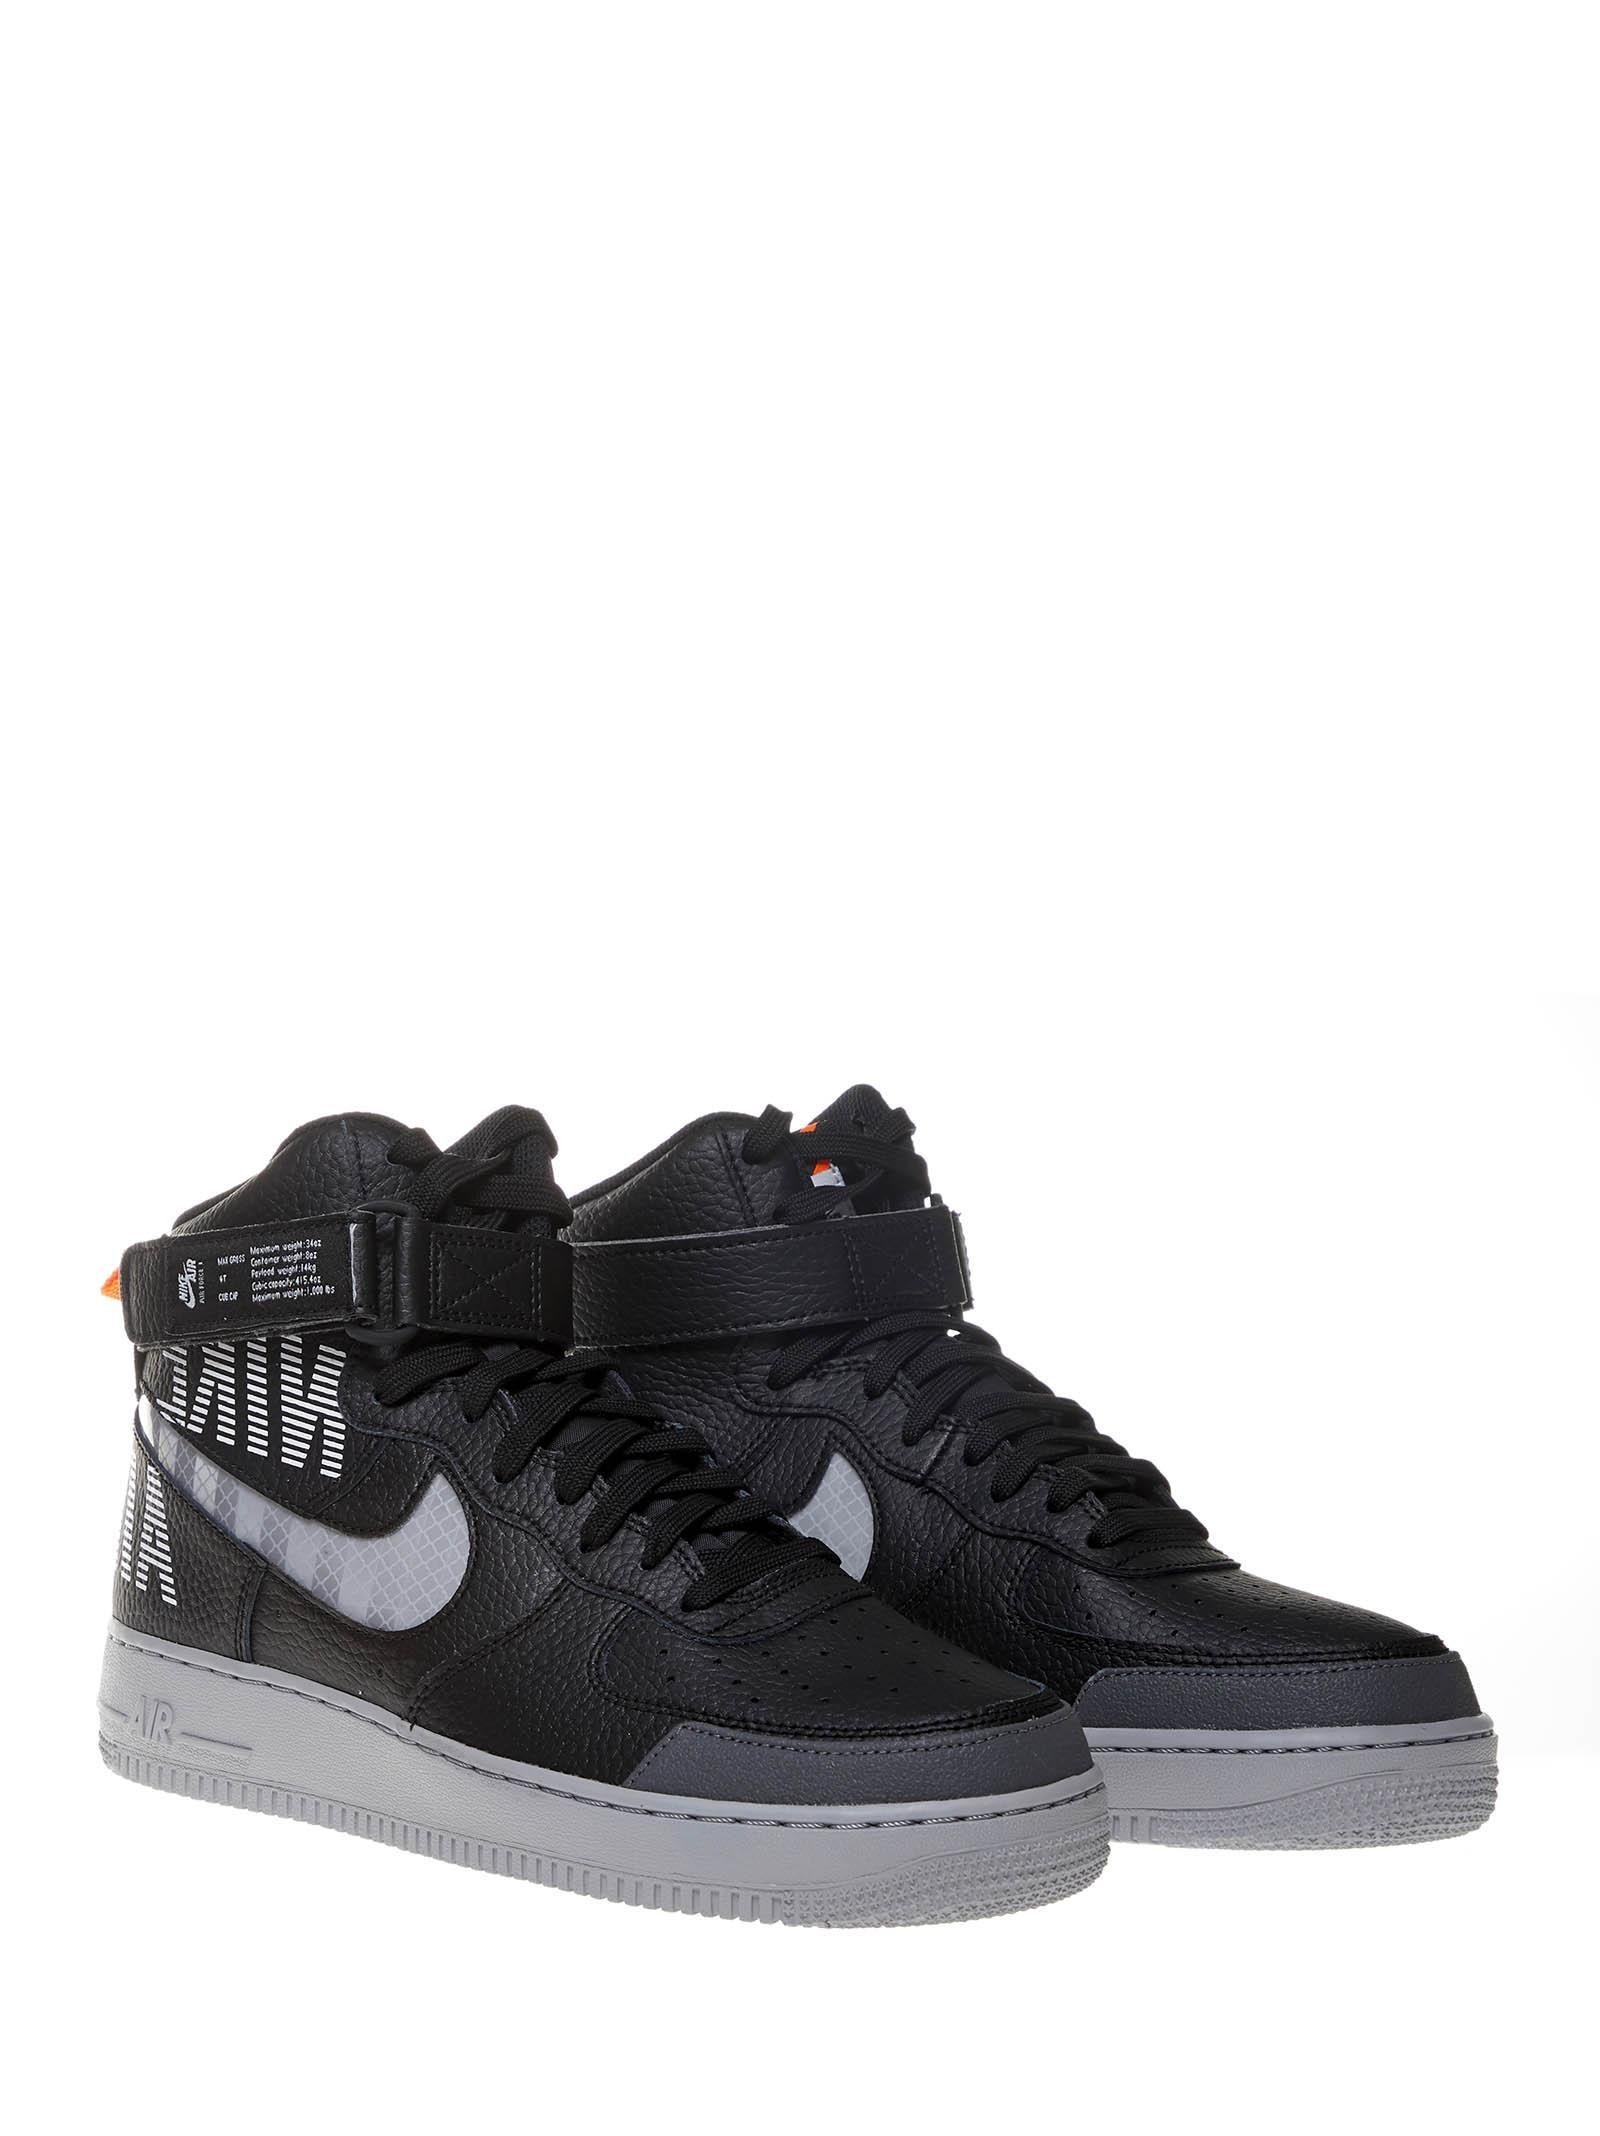 Nike Air 1 Hight '07 Sneakers With Swoosh And Grey Details. for Men | Lyst